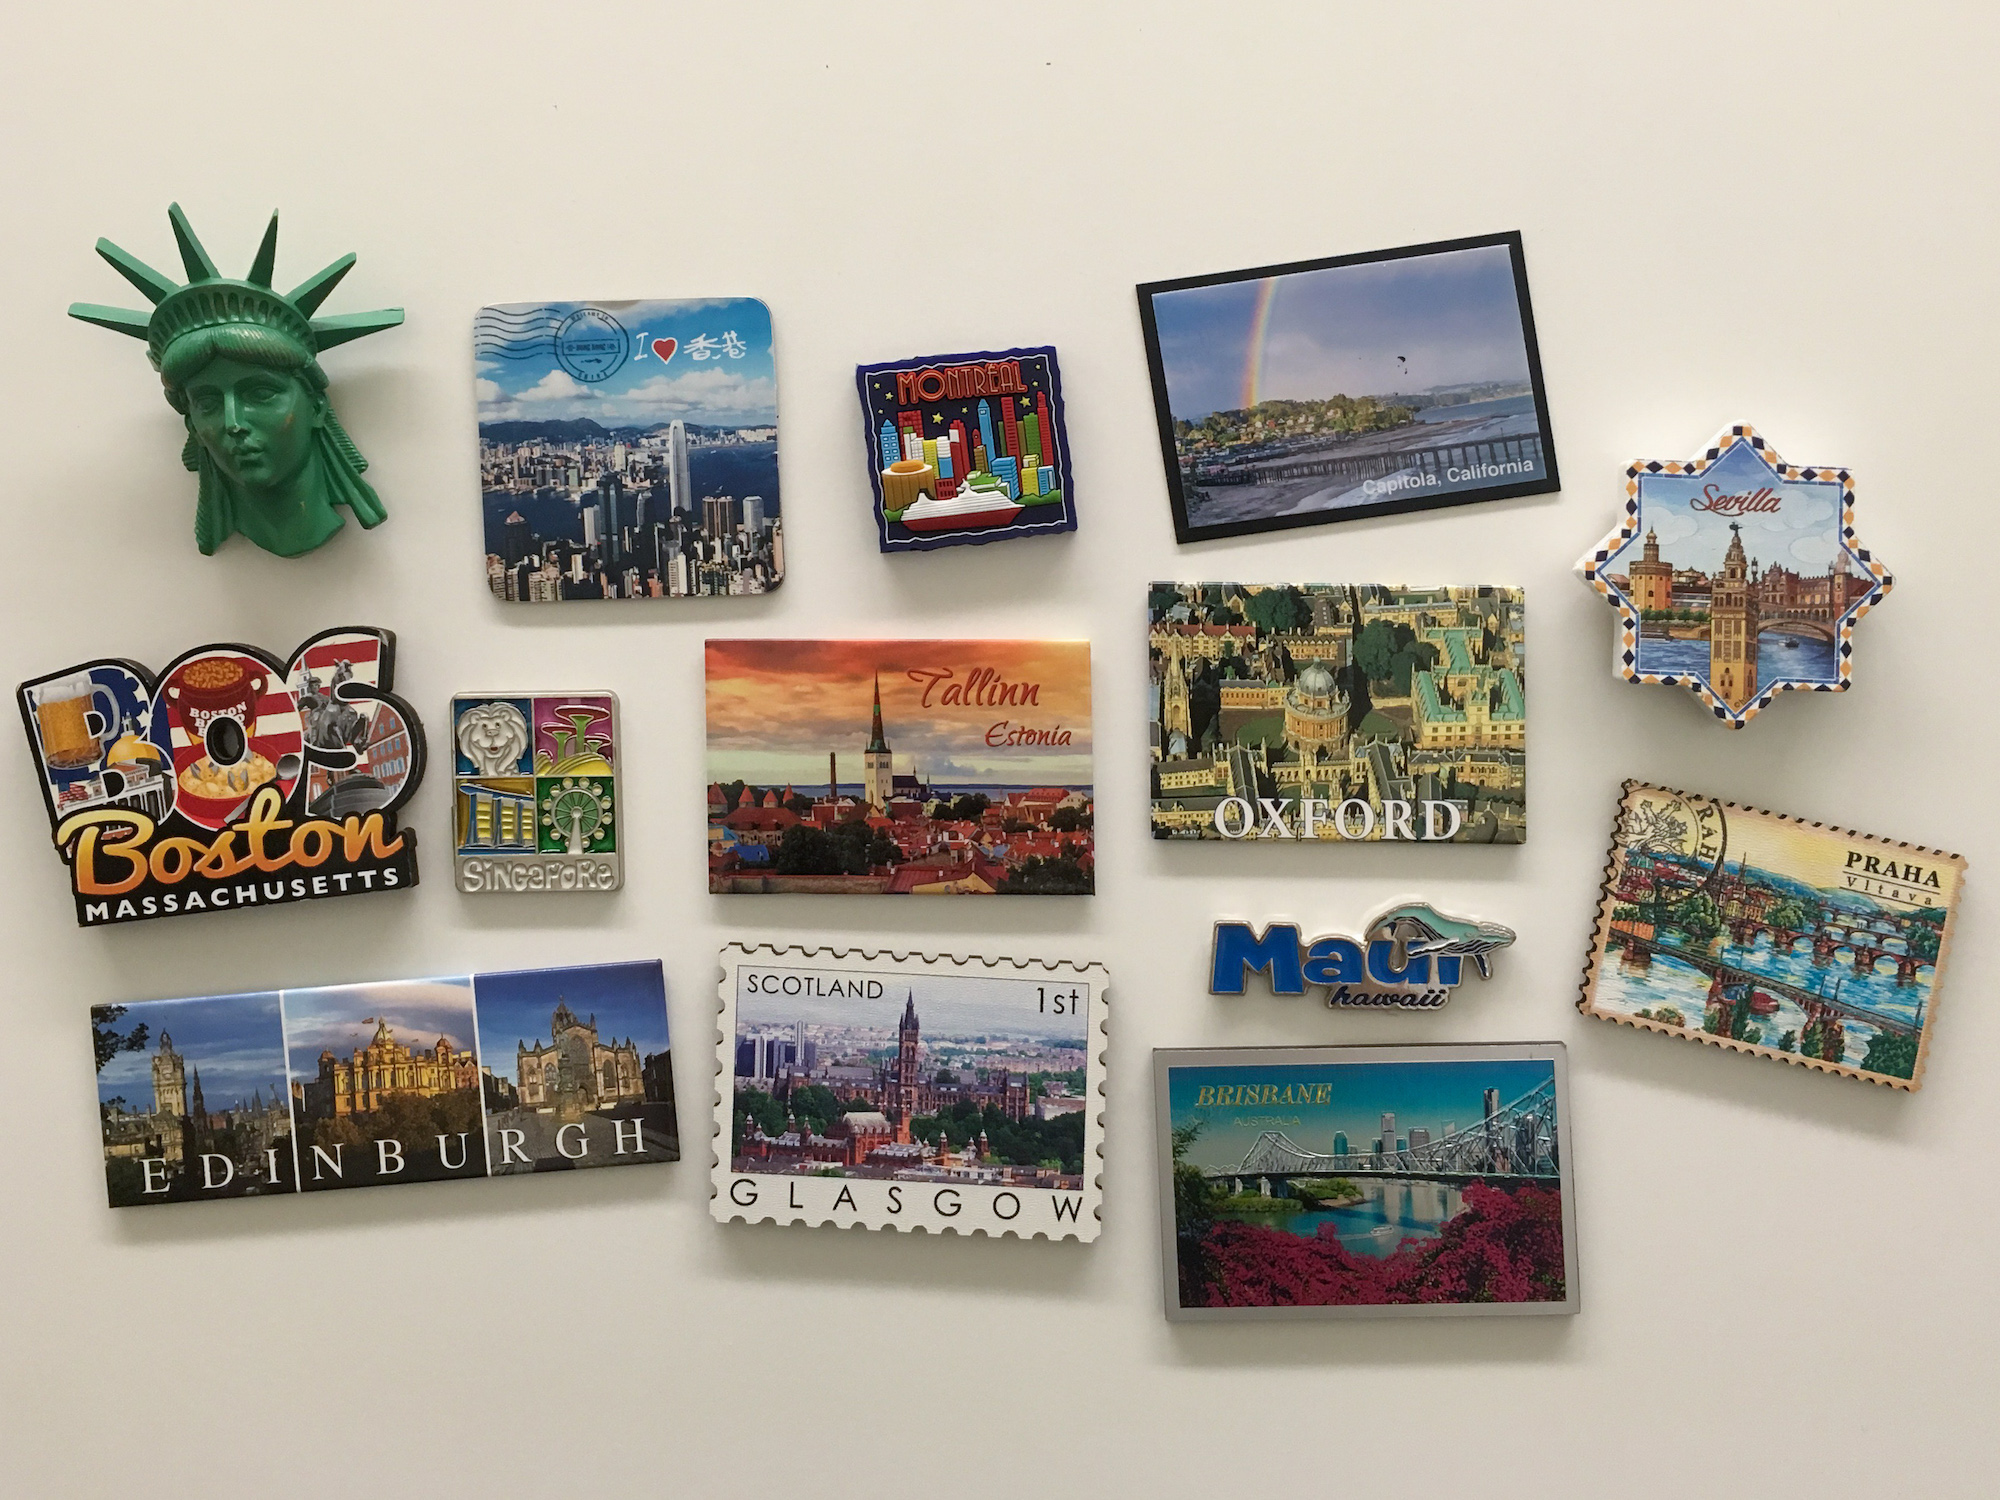 A collection of magnets commemorating different locations.